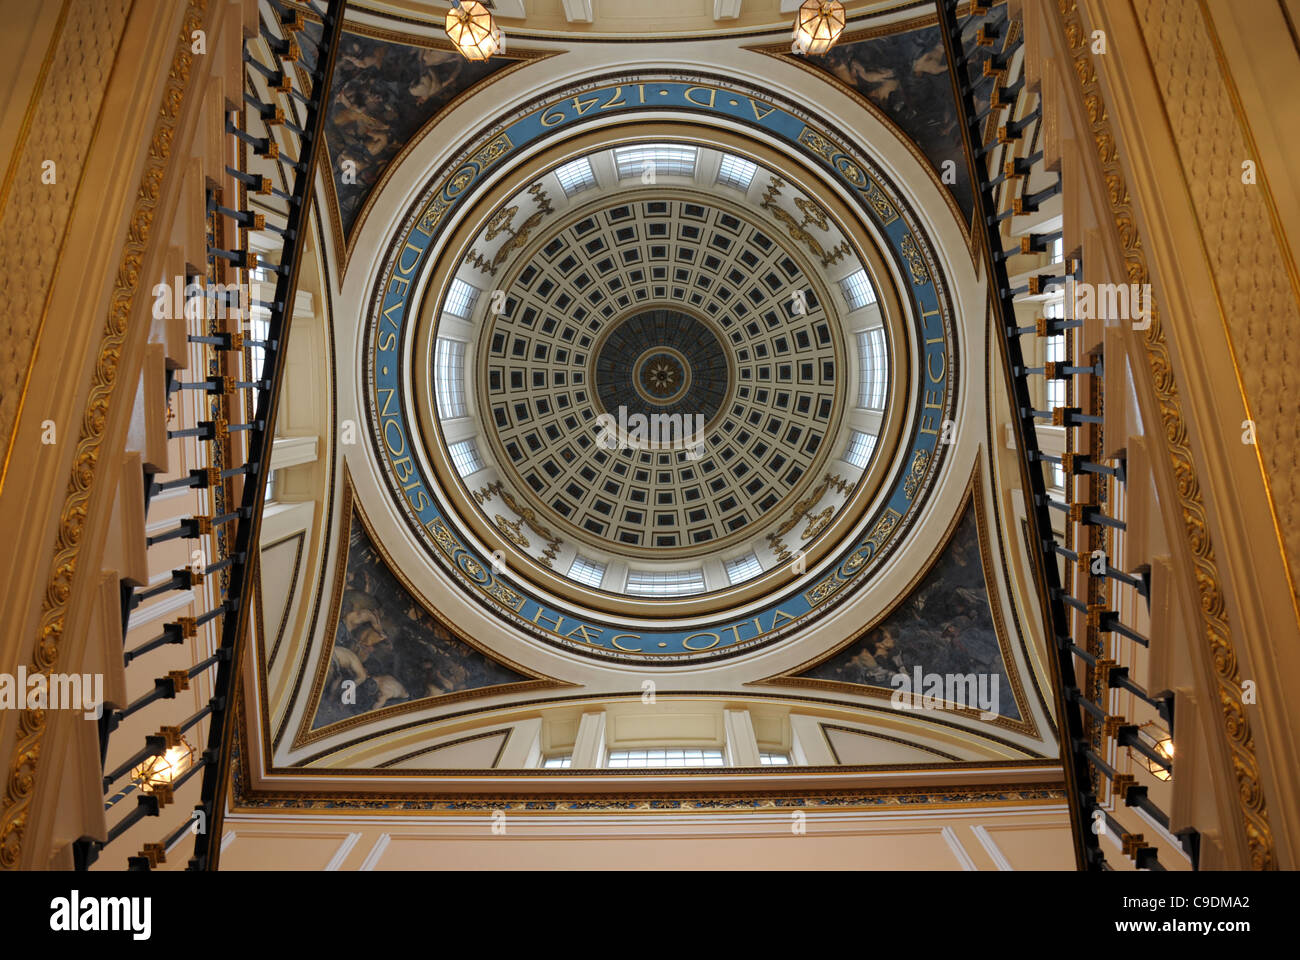 Coupole de Liverpool Town Hall, Liverpool, Merseyside, Angleterre, Royaume-Uni Banque D'Images